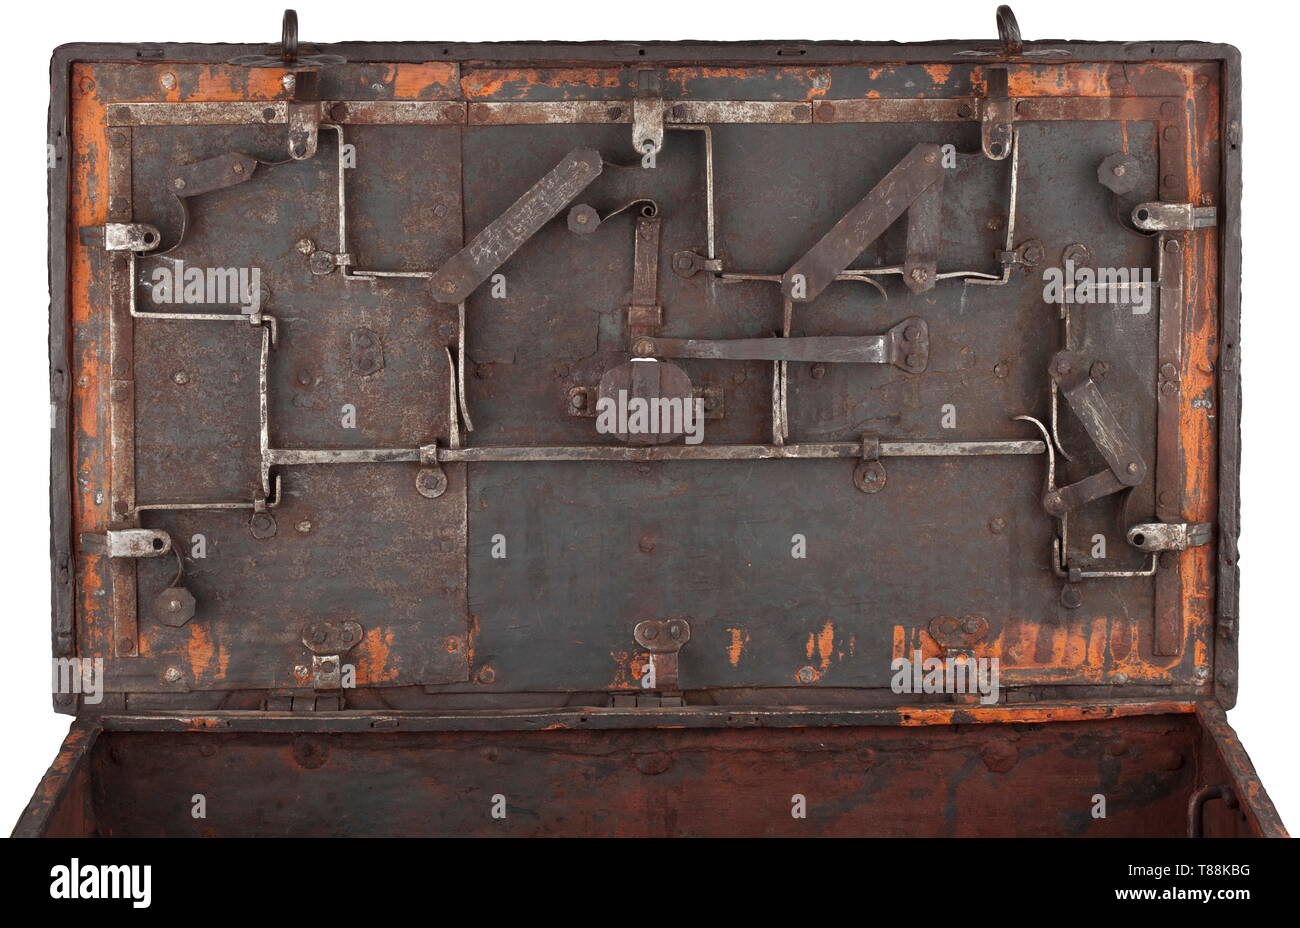 A German strong-box, circa 1700 Rectangular body of sheet iron with riveted band fittings. False lock with florally chased escutcheon and two hasps at front. Hinged lid with central keyhole, original key and five latches. Cover plate missing. Two movable side handles. Size 84 x 48 x 48 cm. historic, historical, 18th century, Additional-Rights-Clearance-Info-Not-Available Stock Photo